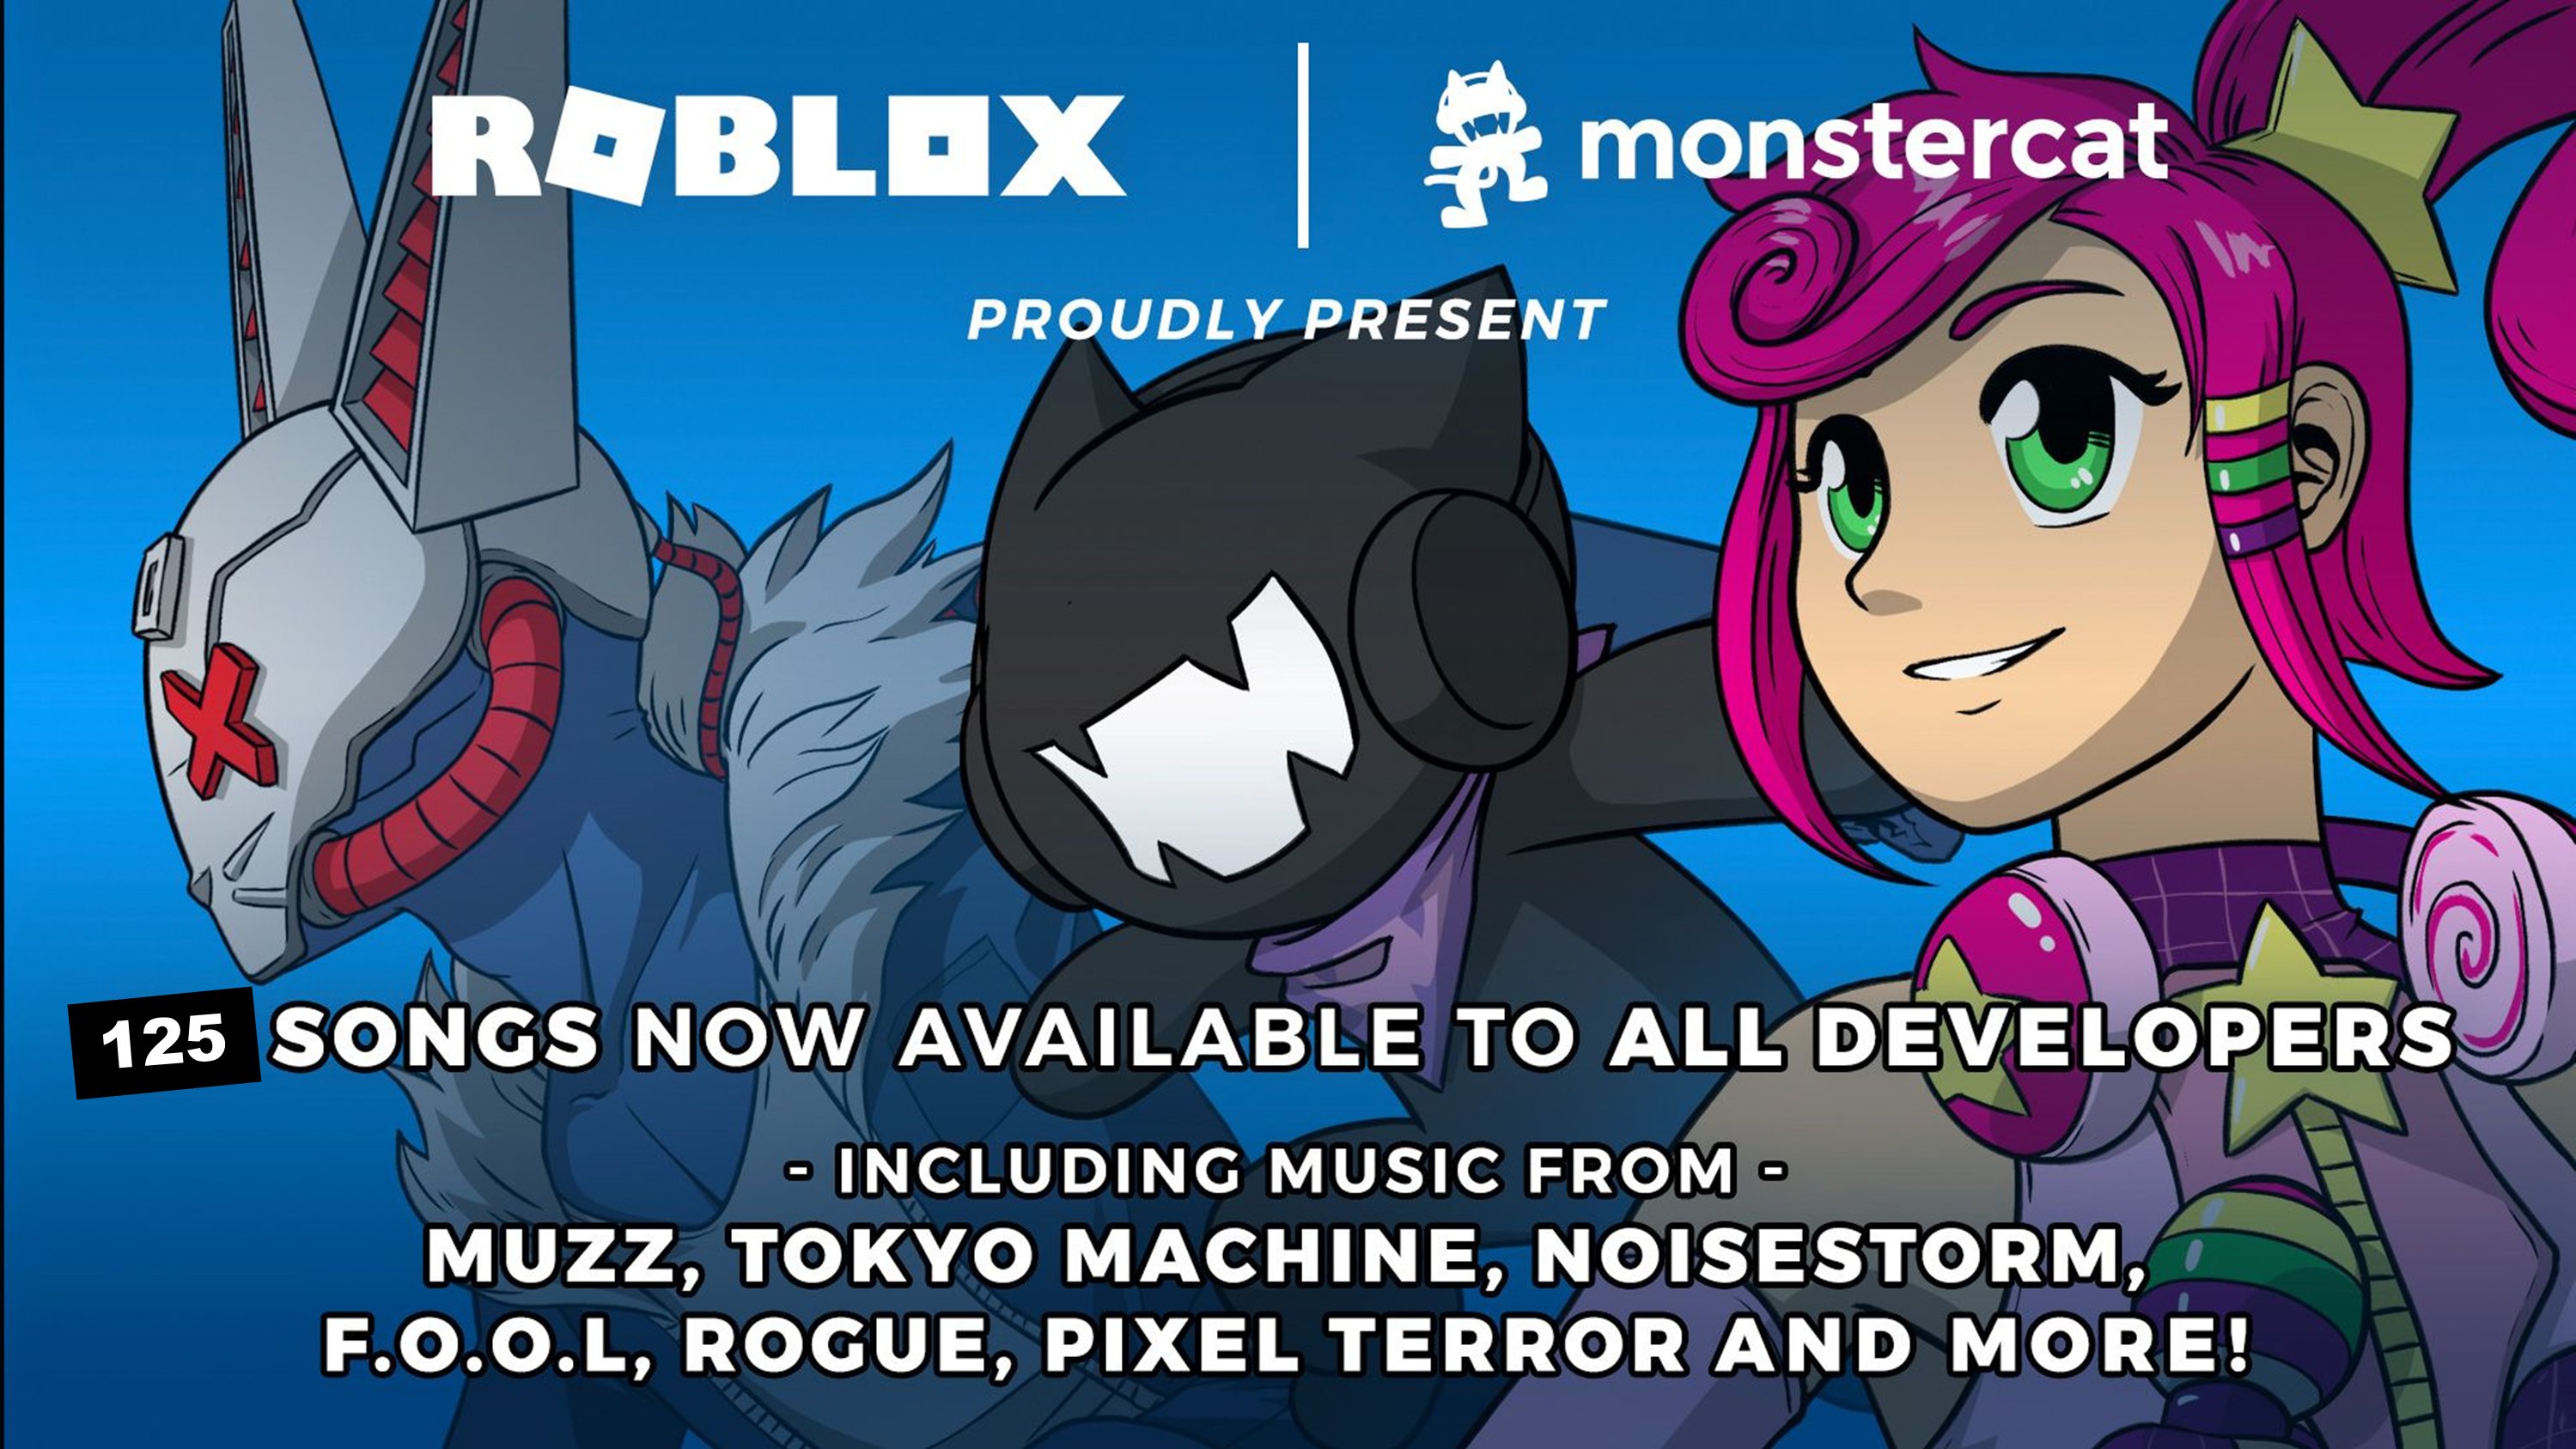 Bloxy News on X: Monstercat has also added an additional 75 music tracks  to the already-existing developer library of 50 tracks (now 125 total).  These songs are available to use in your